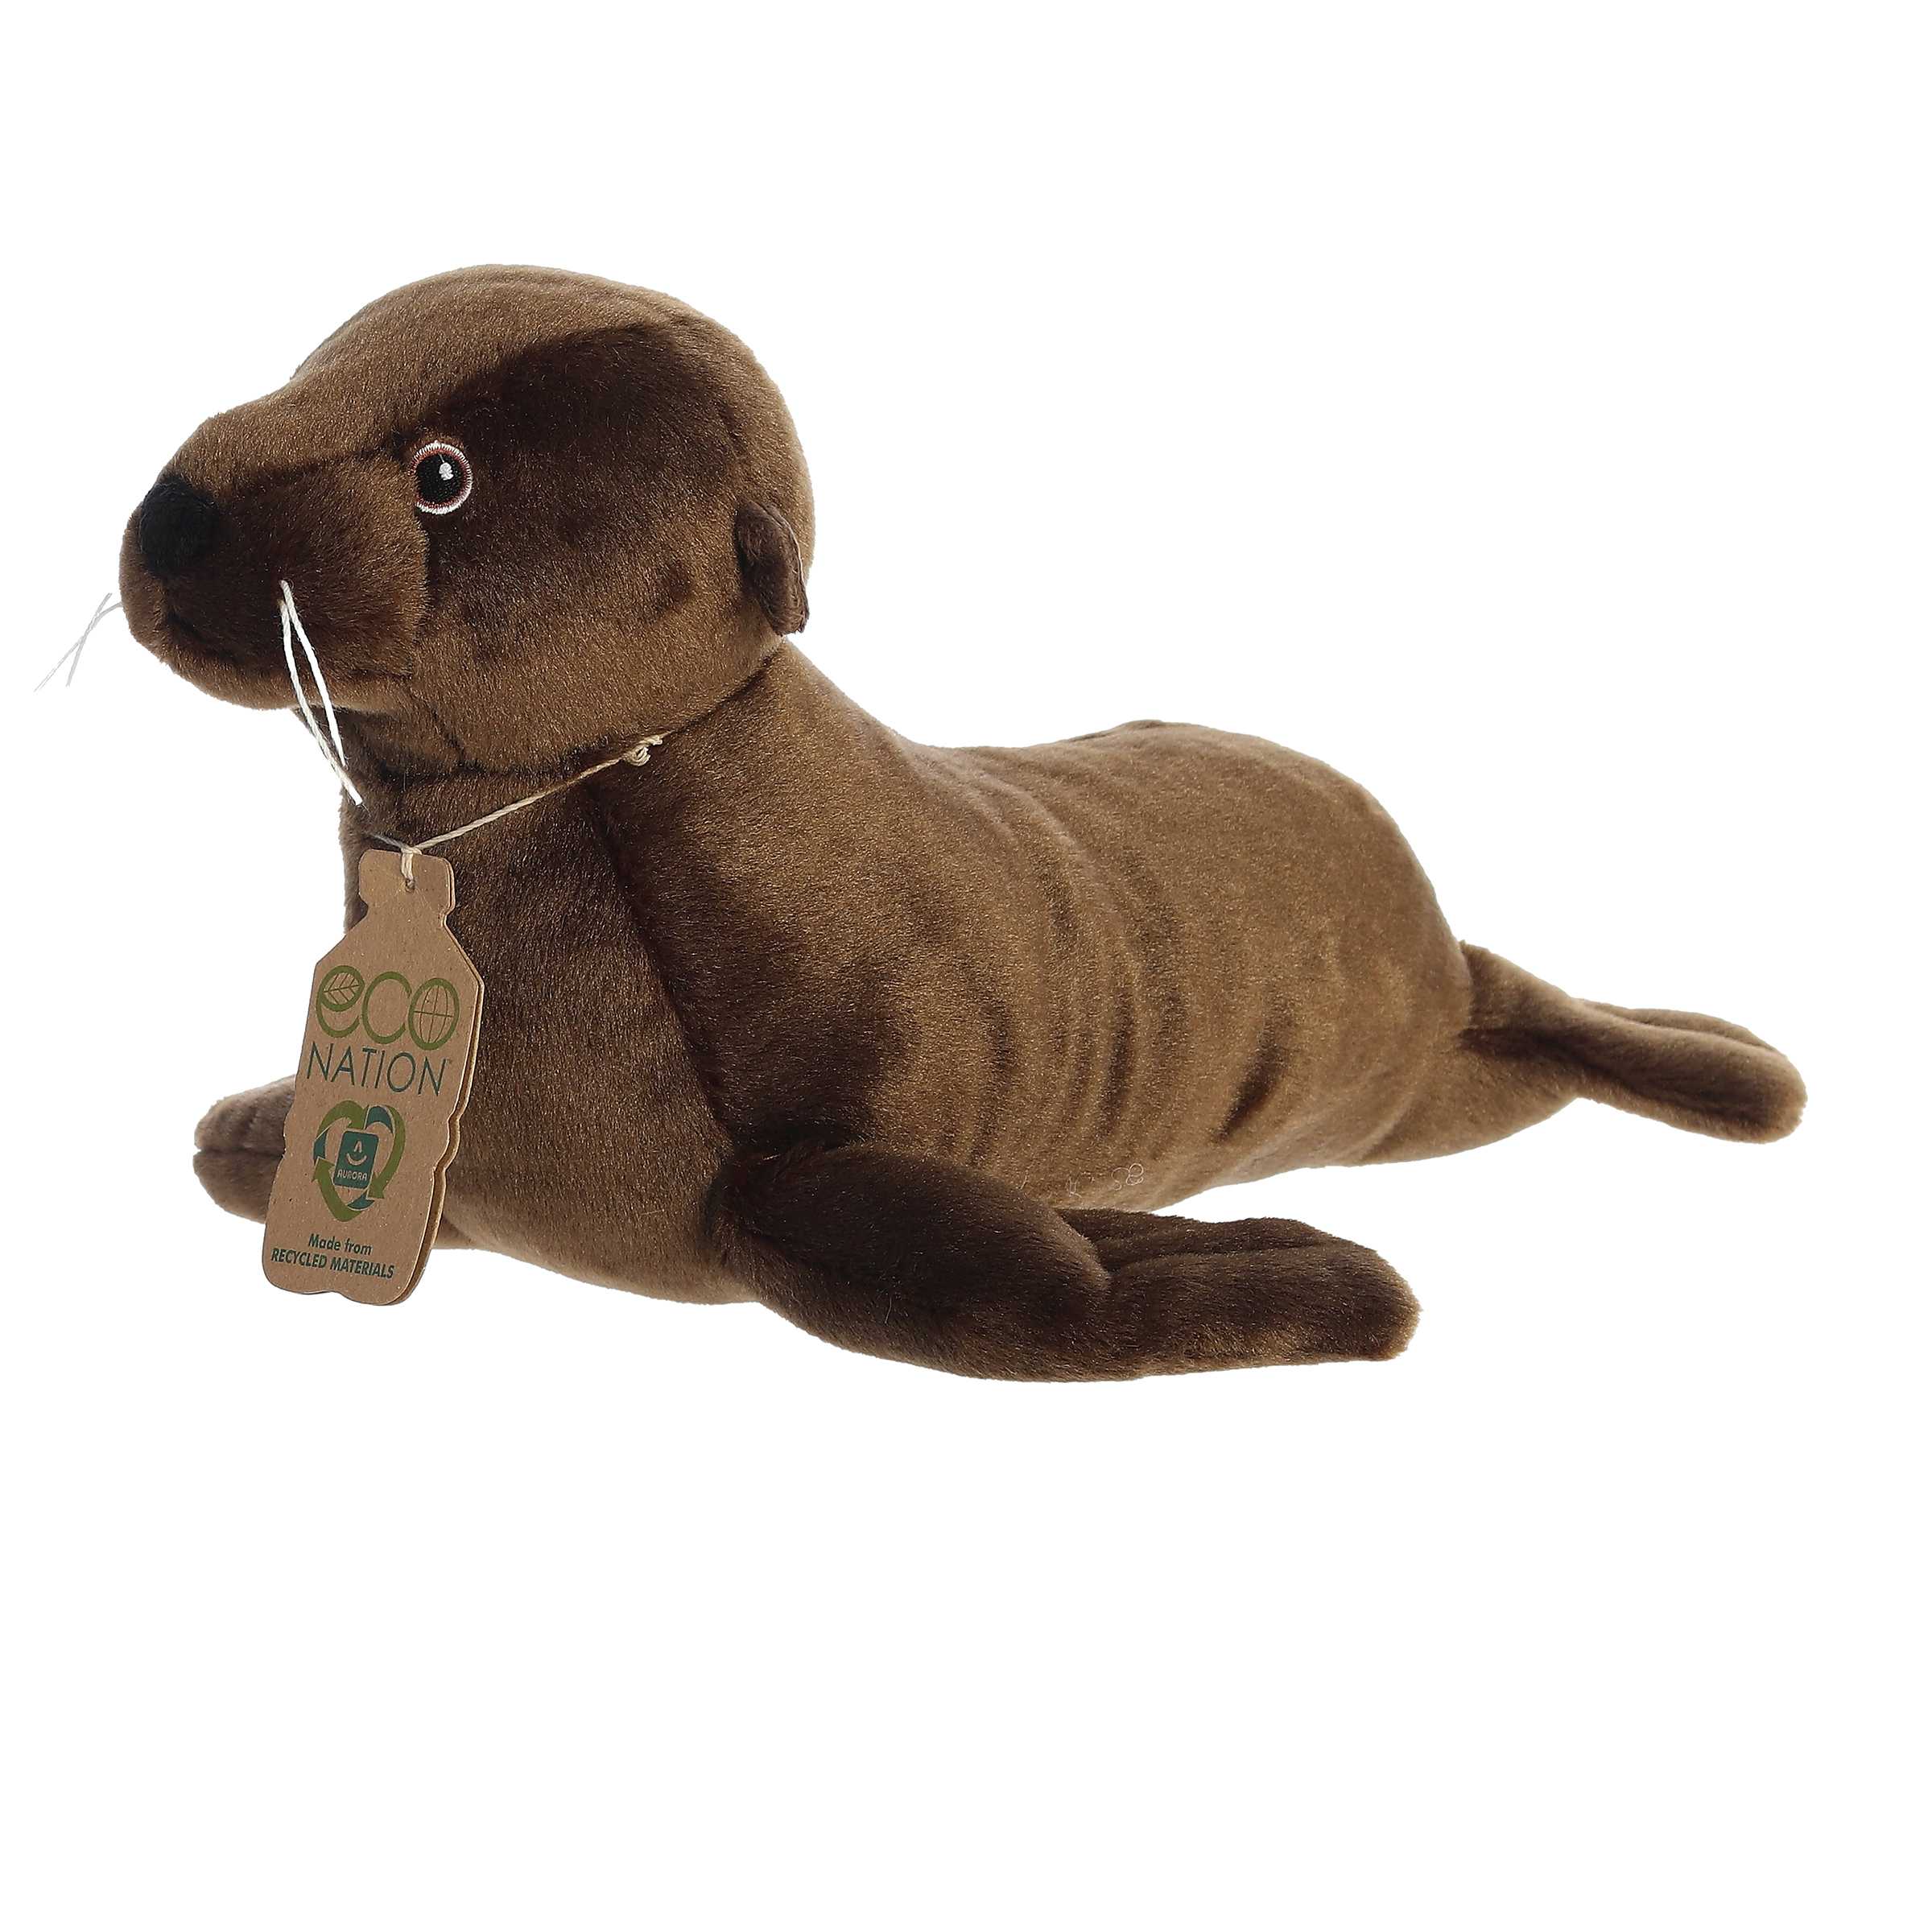 Aurora Eco Hugs Sea Lion Plush, featuring charming sea lion traits, made from recycled materials with Eco Nation hang tag.